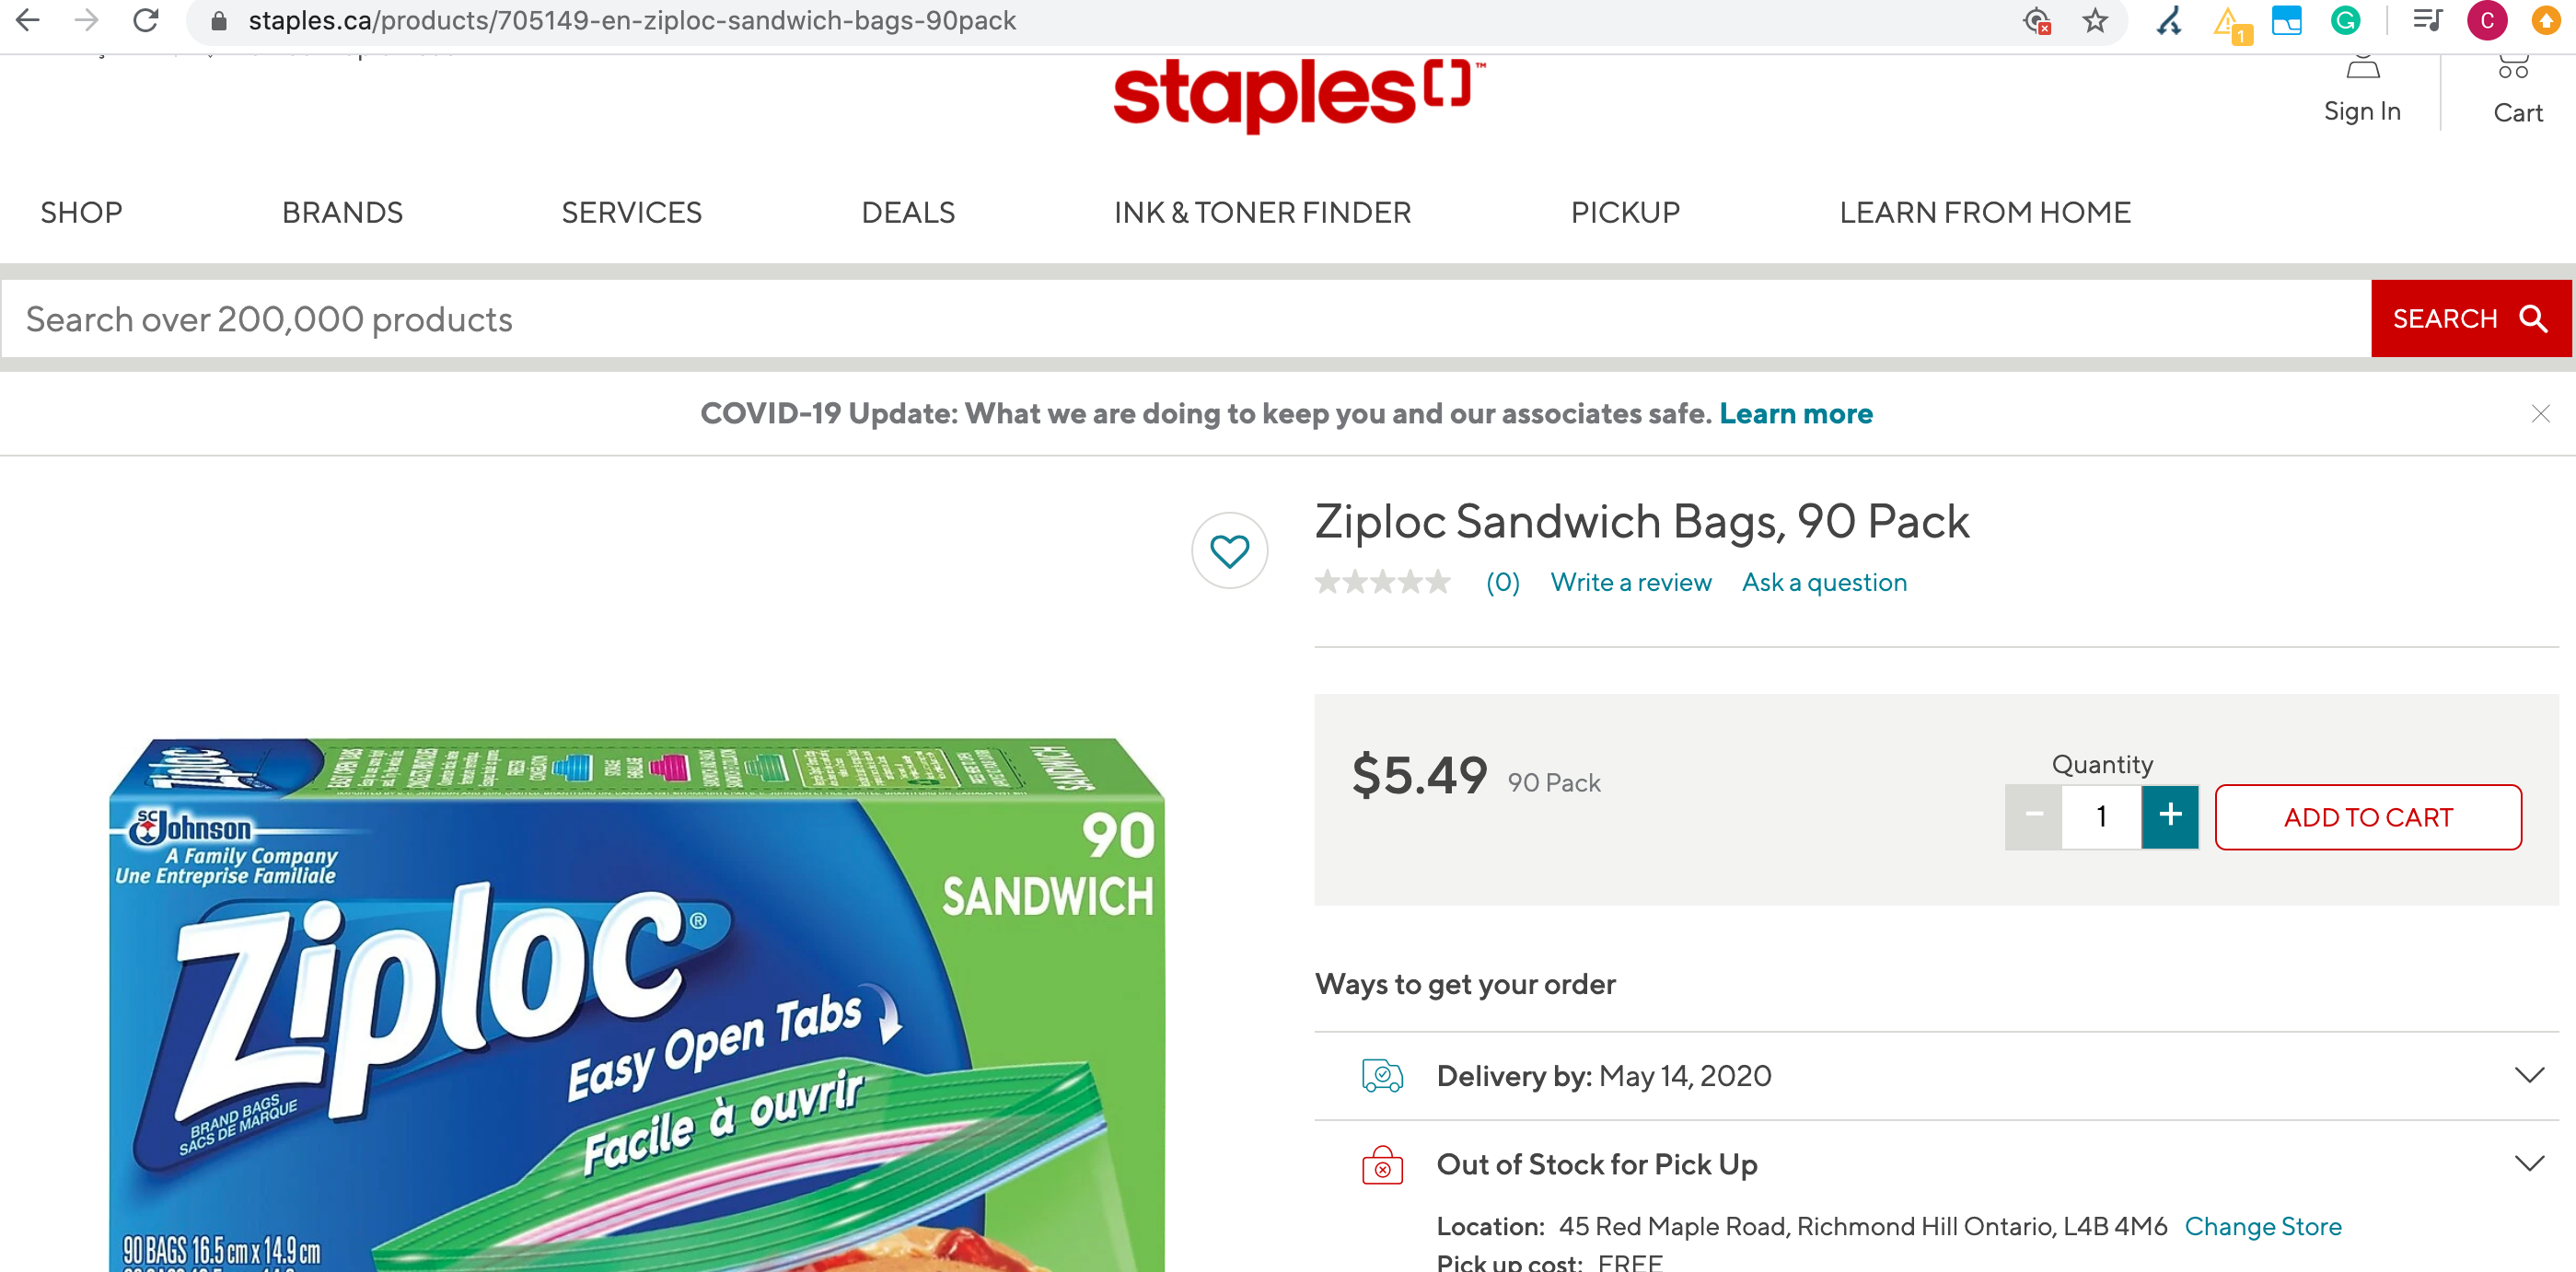 Staples online store on root domain